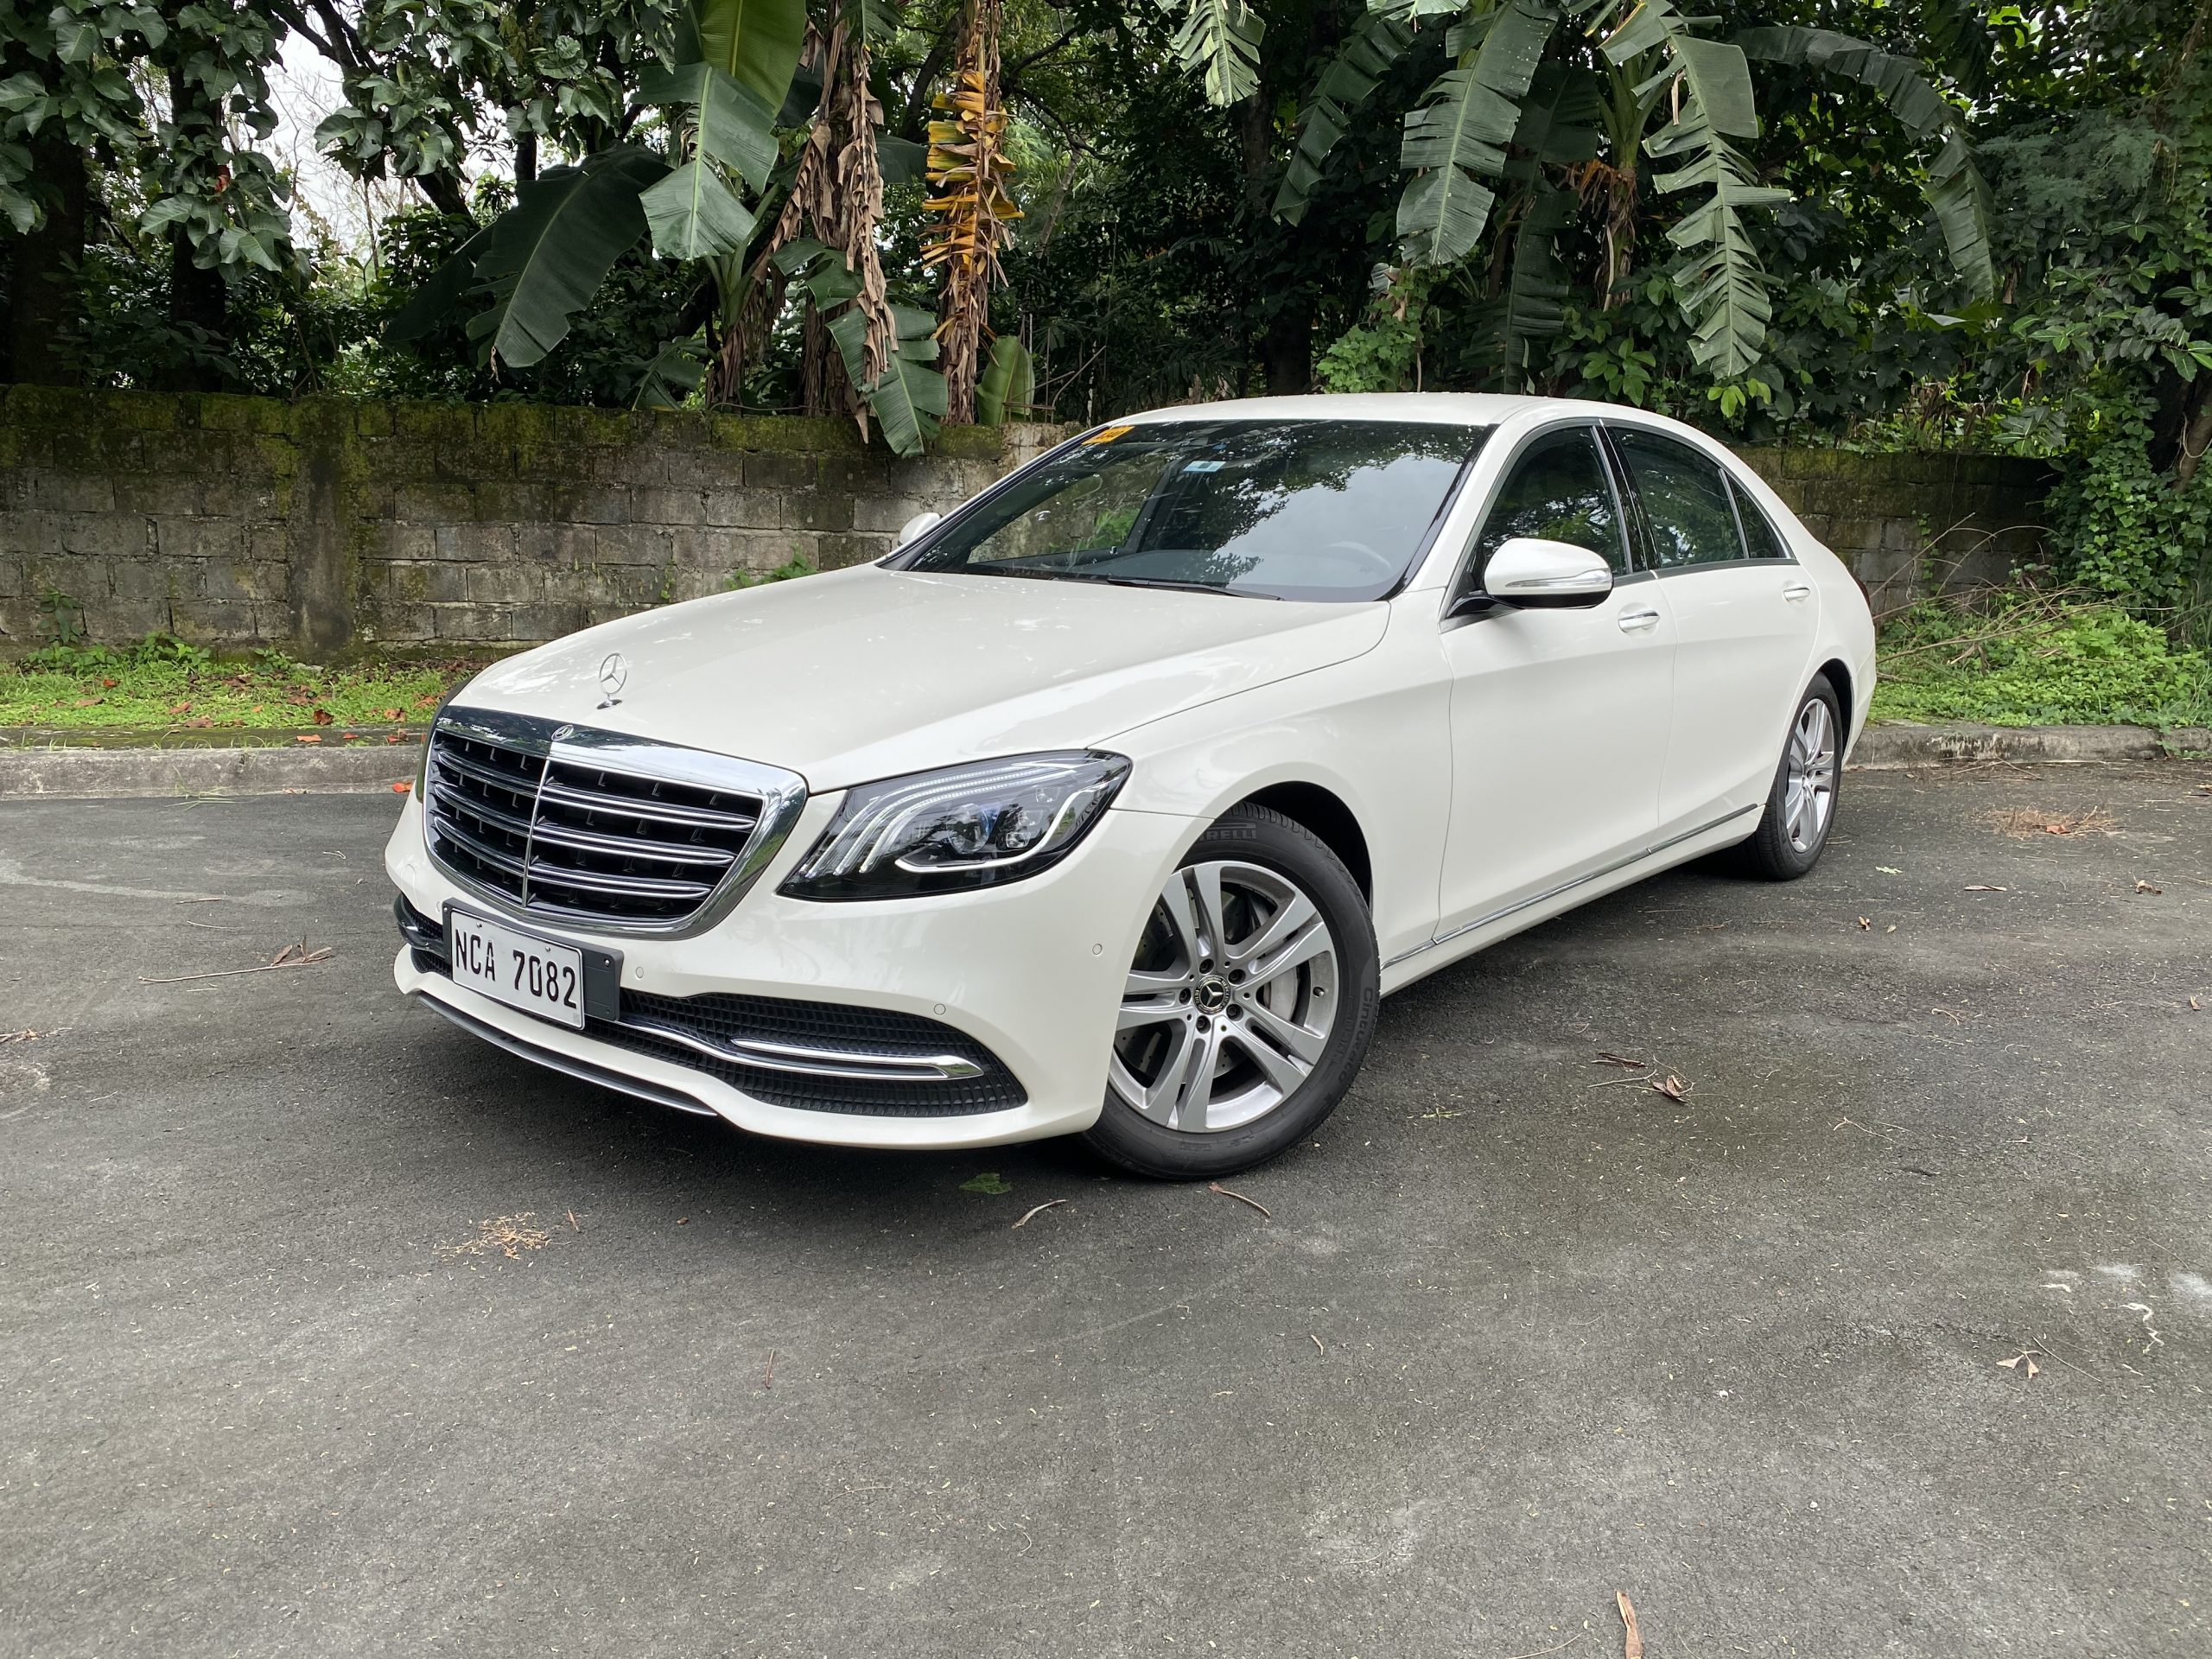 The Mercedes-Benz S Class — The car people think of when you say